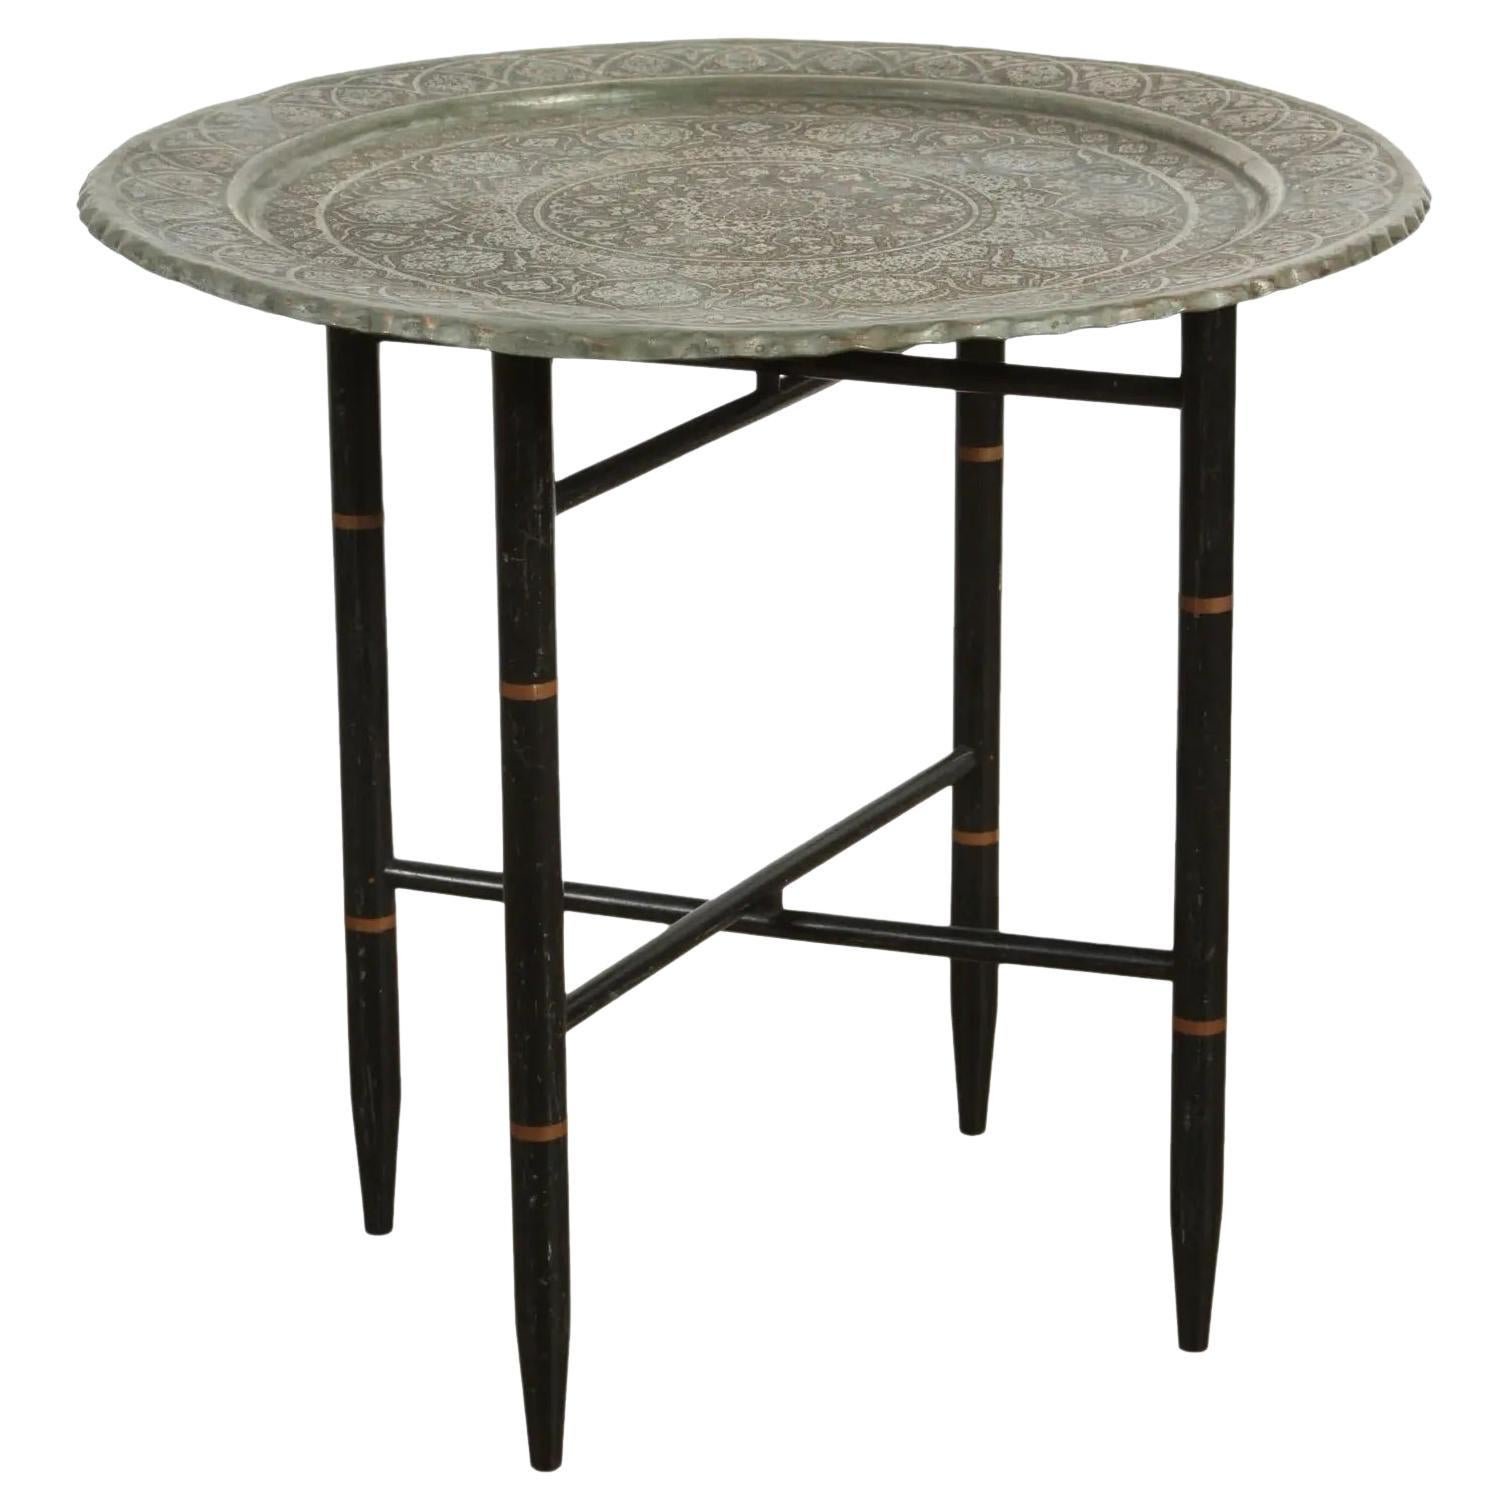 19th Century Persian Style Copper Tray Side Table For Sale